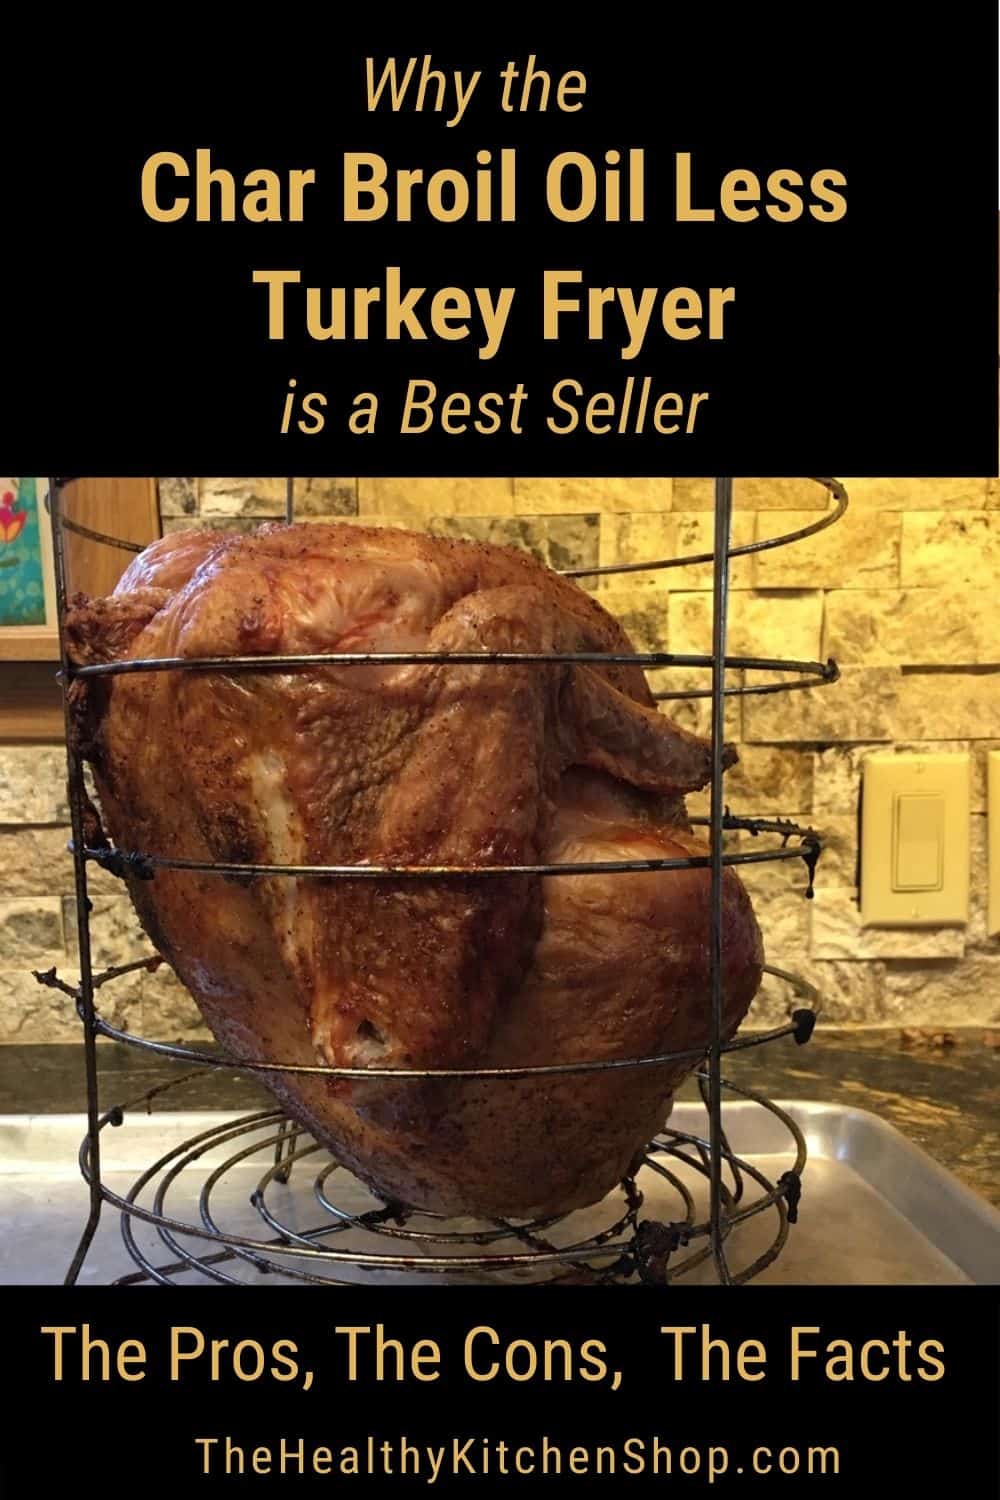 Why the Char Broil Oil Less Turkey Fryer is a Best Seller